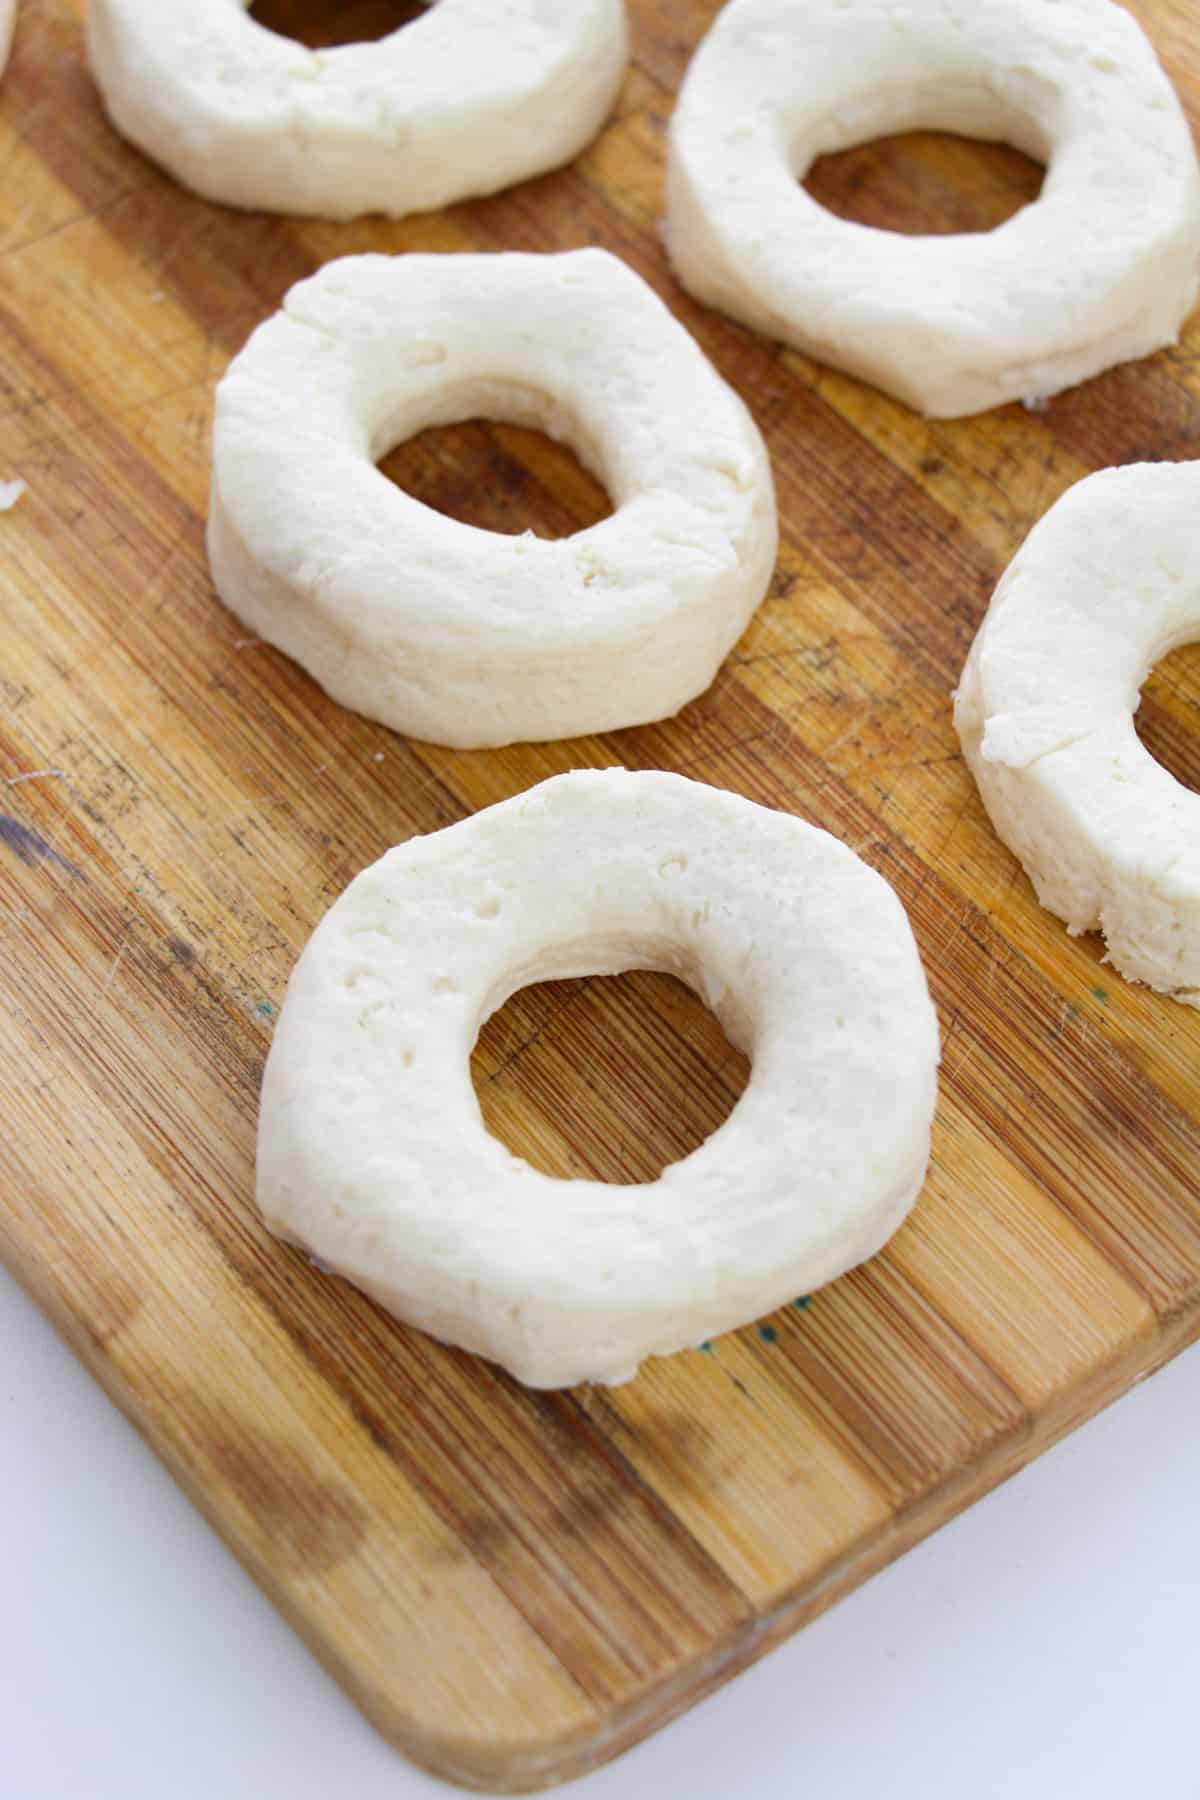 Canned biscuit dough with hole cut out of middle to become a doughnut